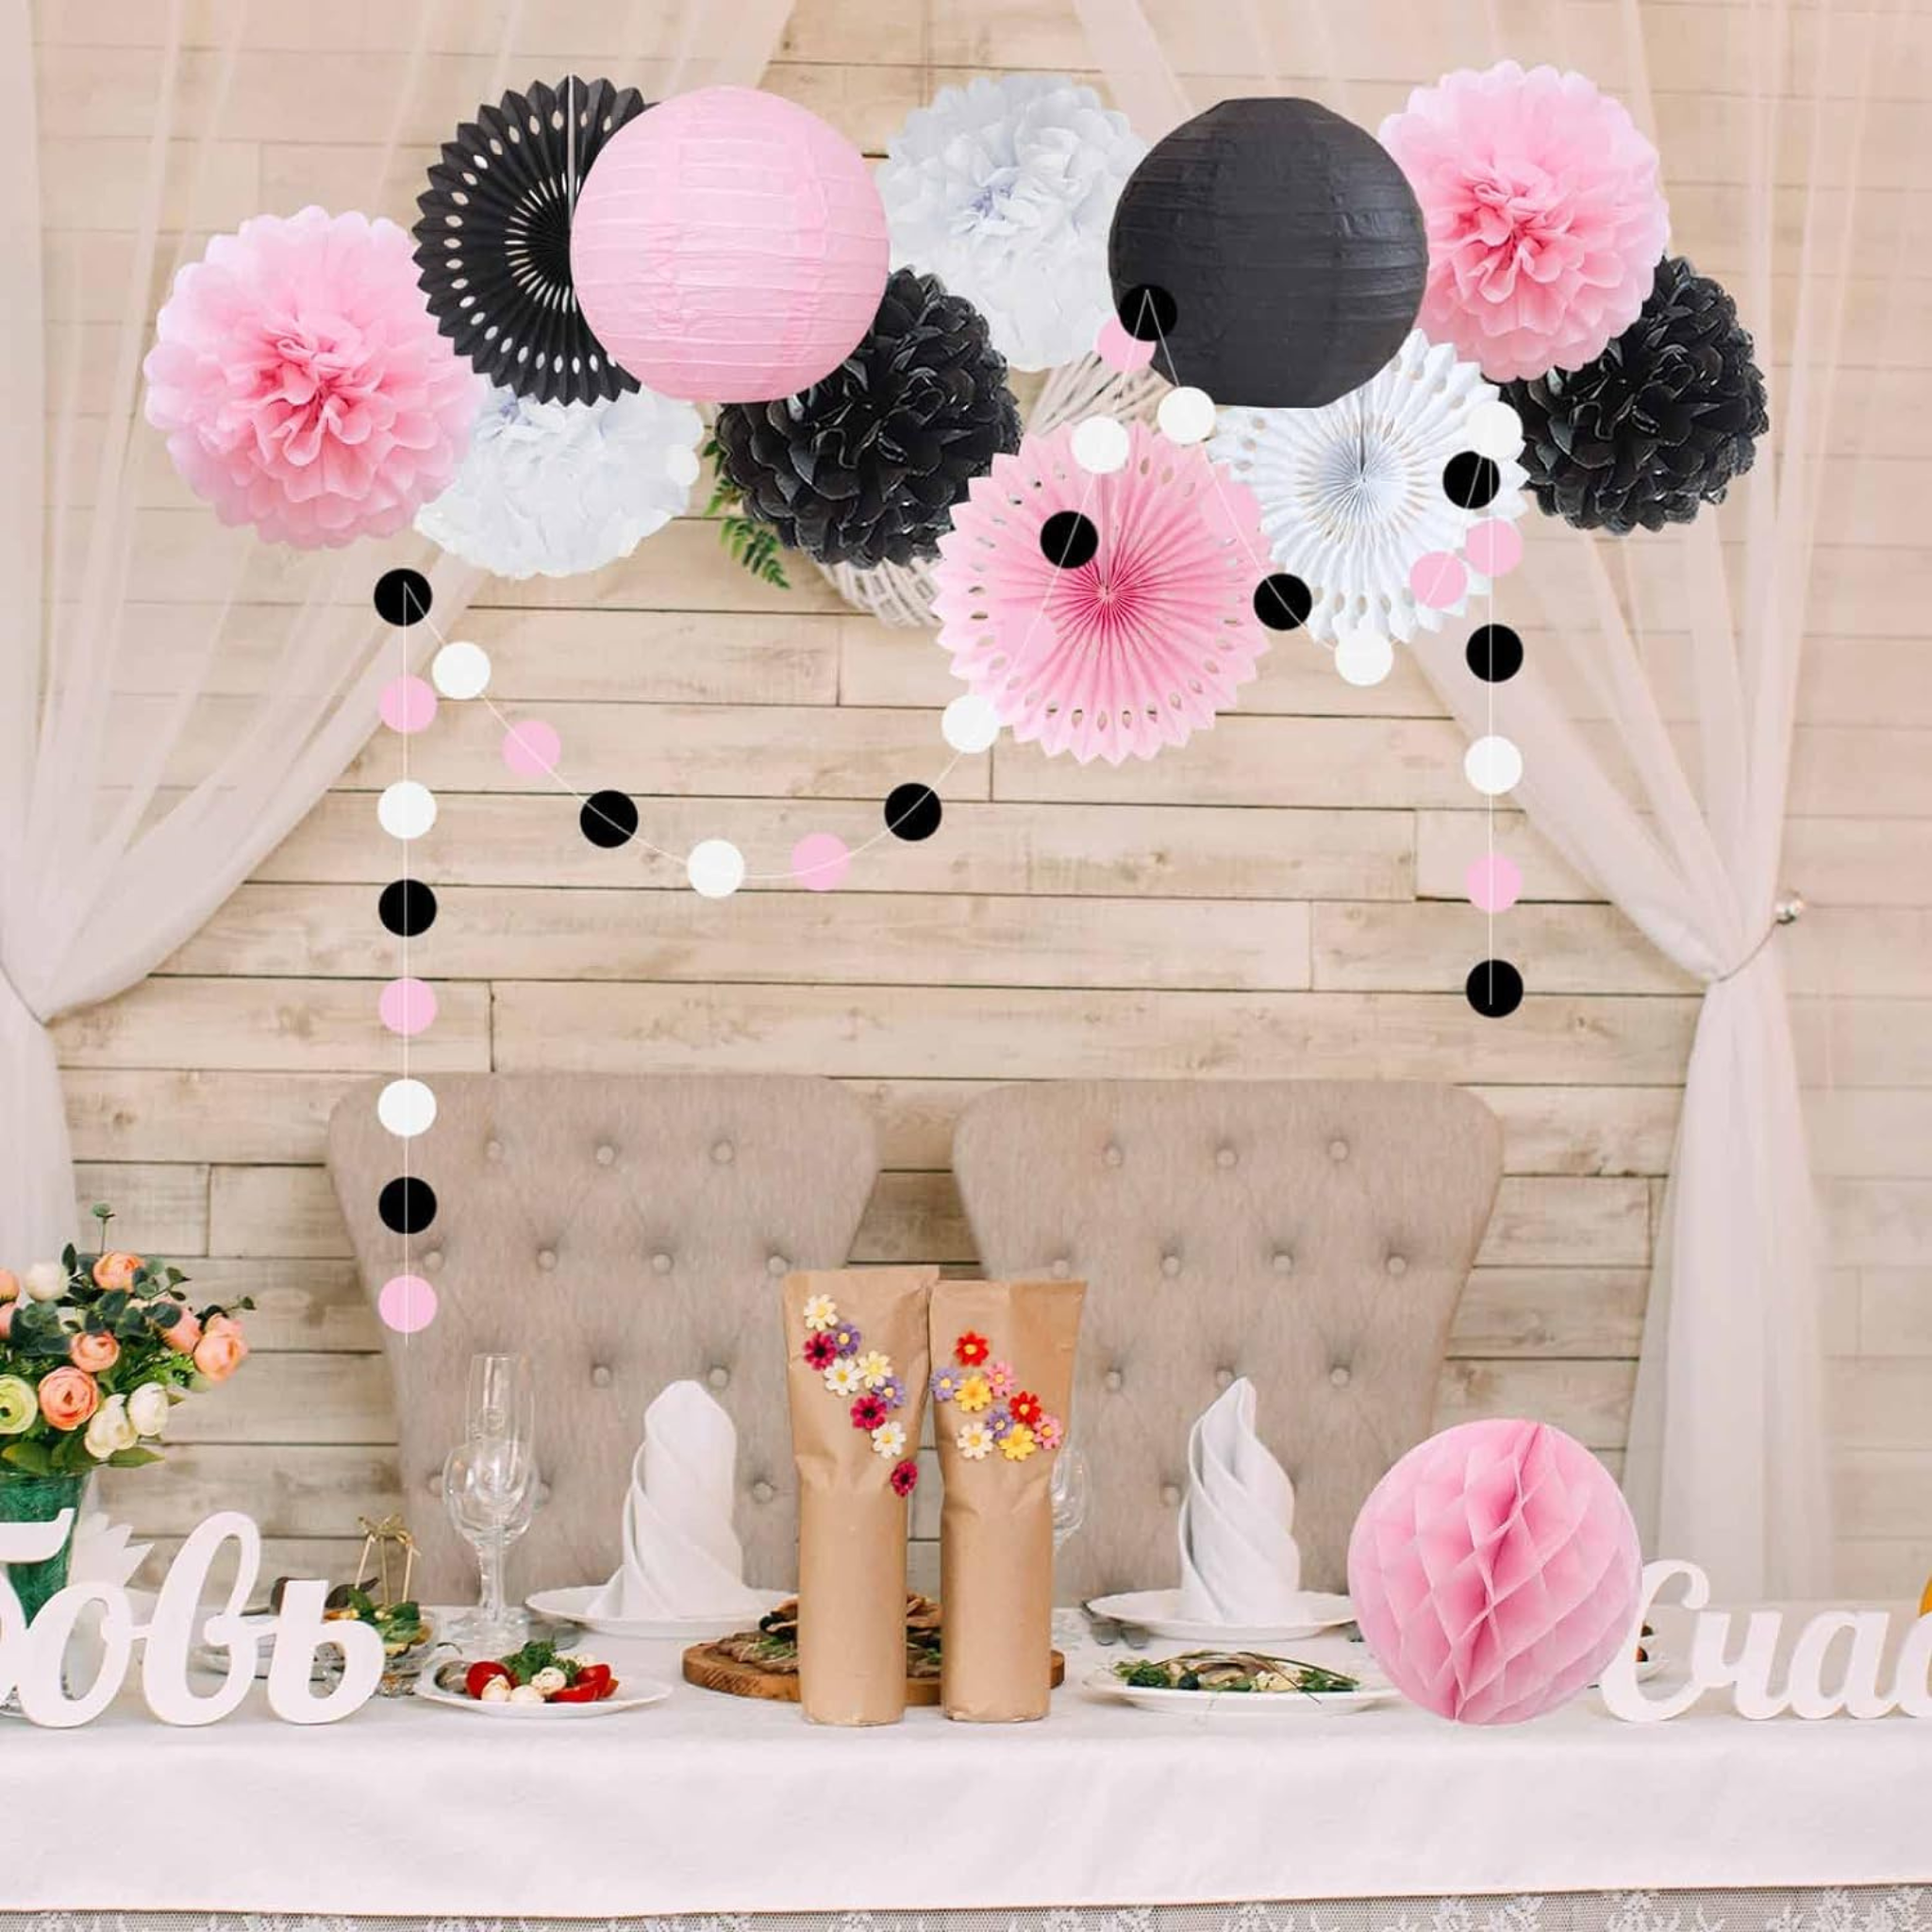 Black Pink and White Party Decorations